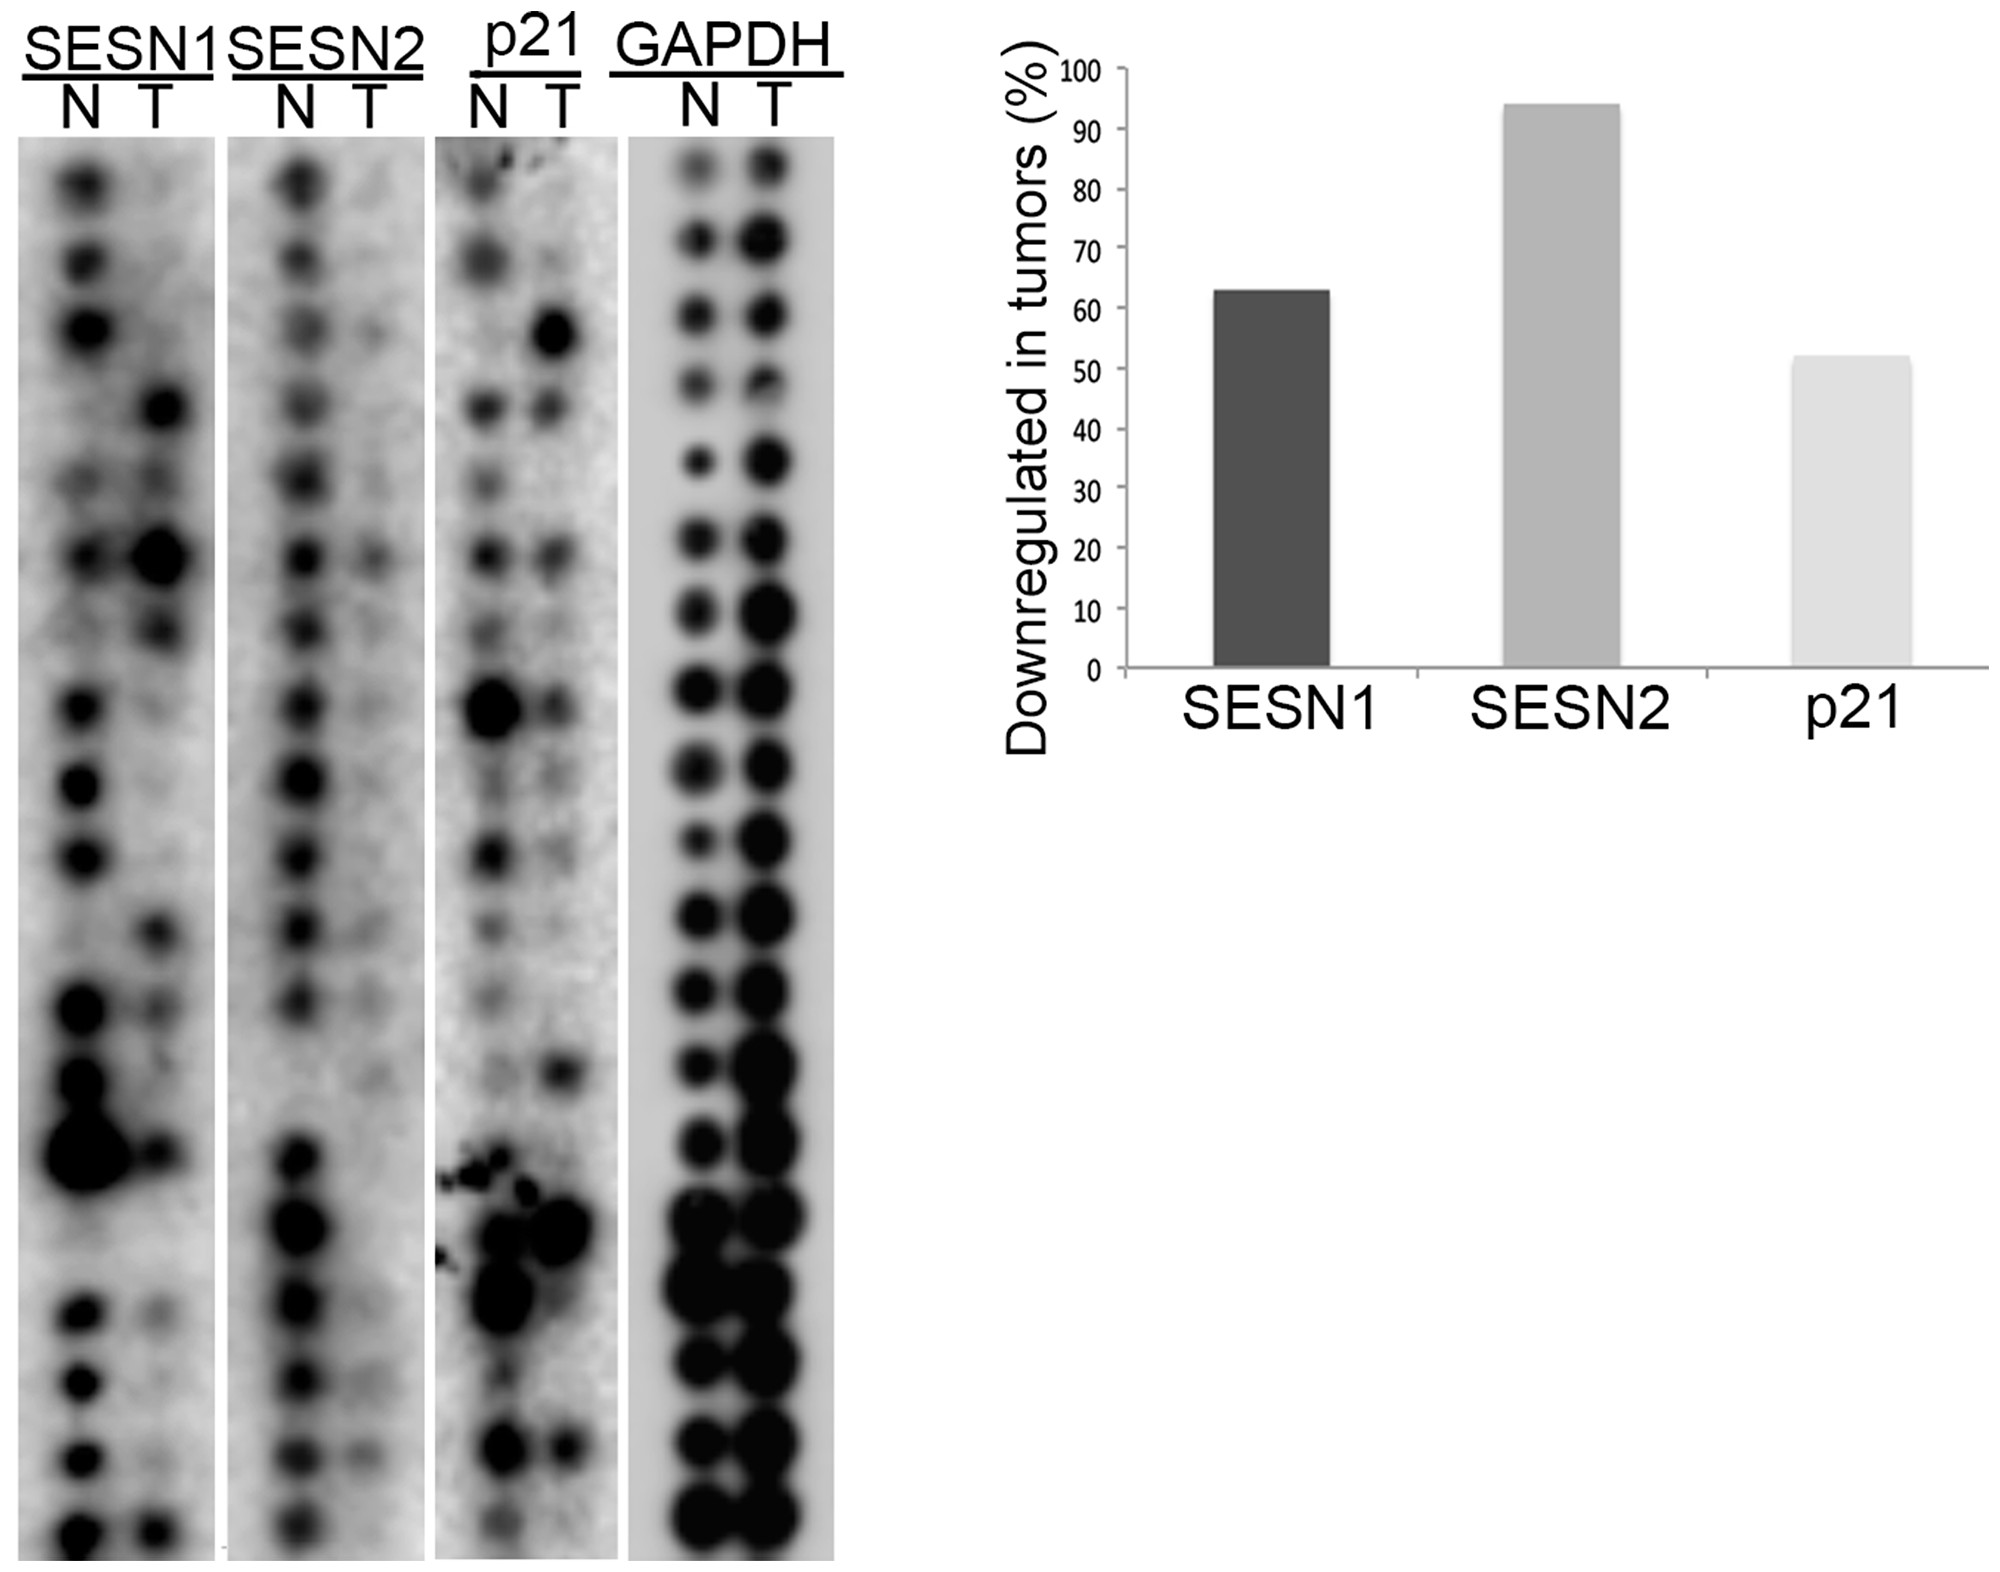 The expression of SESN1 and SESN2 genes is decreased in human lung tumors.